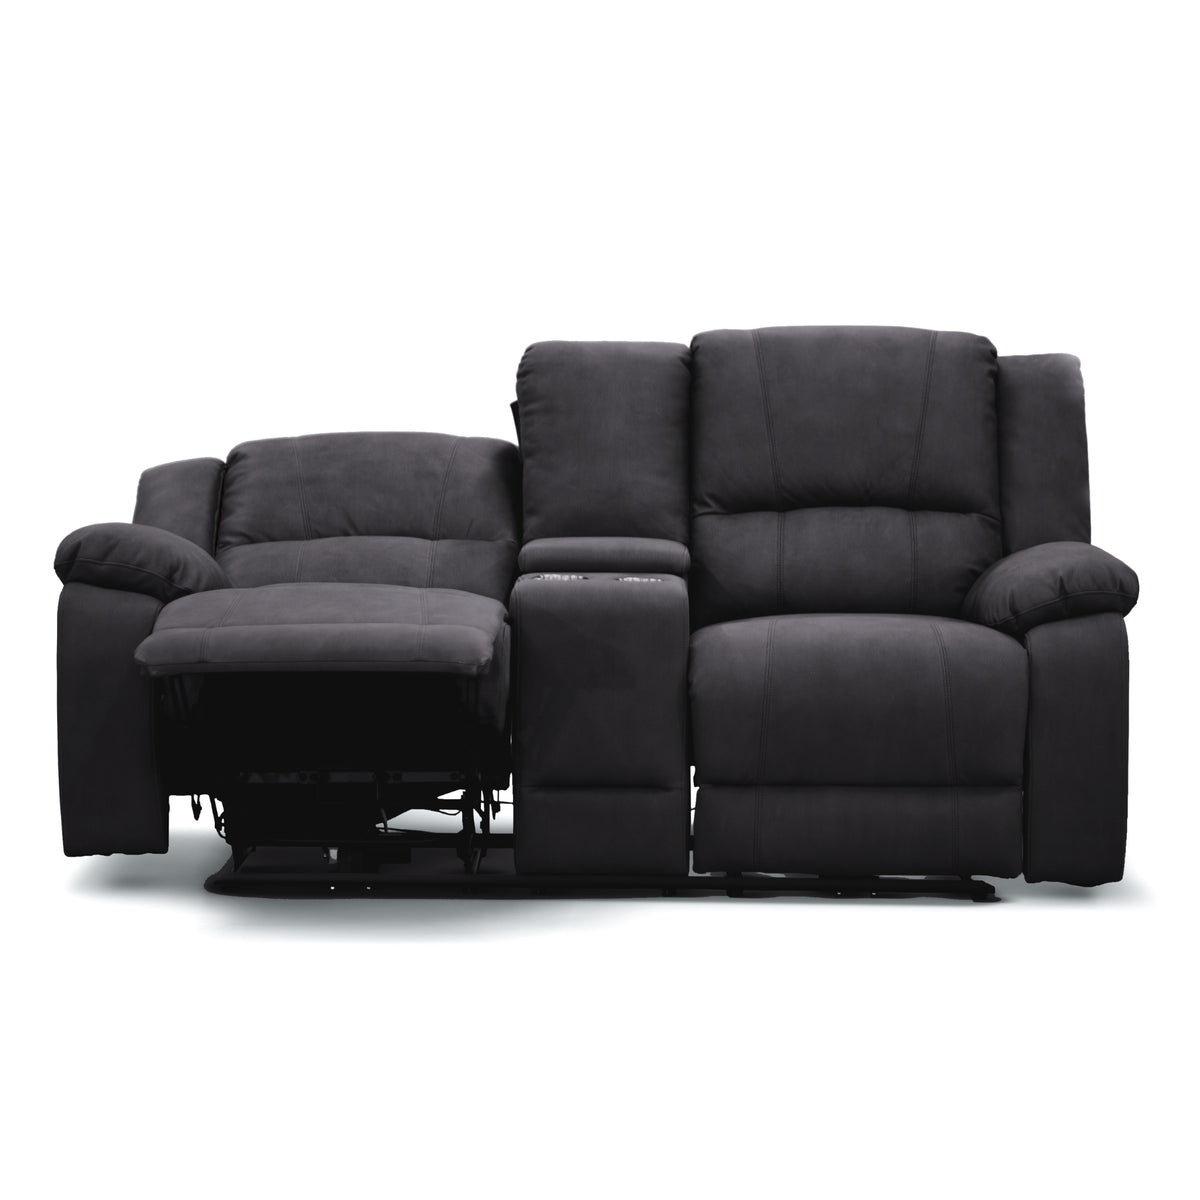 Anderson Fabric Electric Recliner Sofa Lounge Chair JET Dark Grey 1 + 2 + 3 Seater